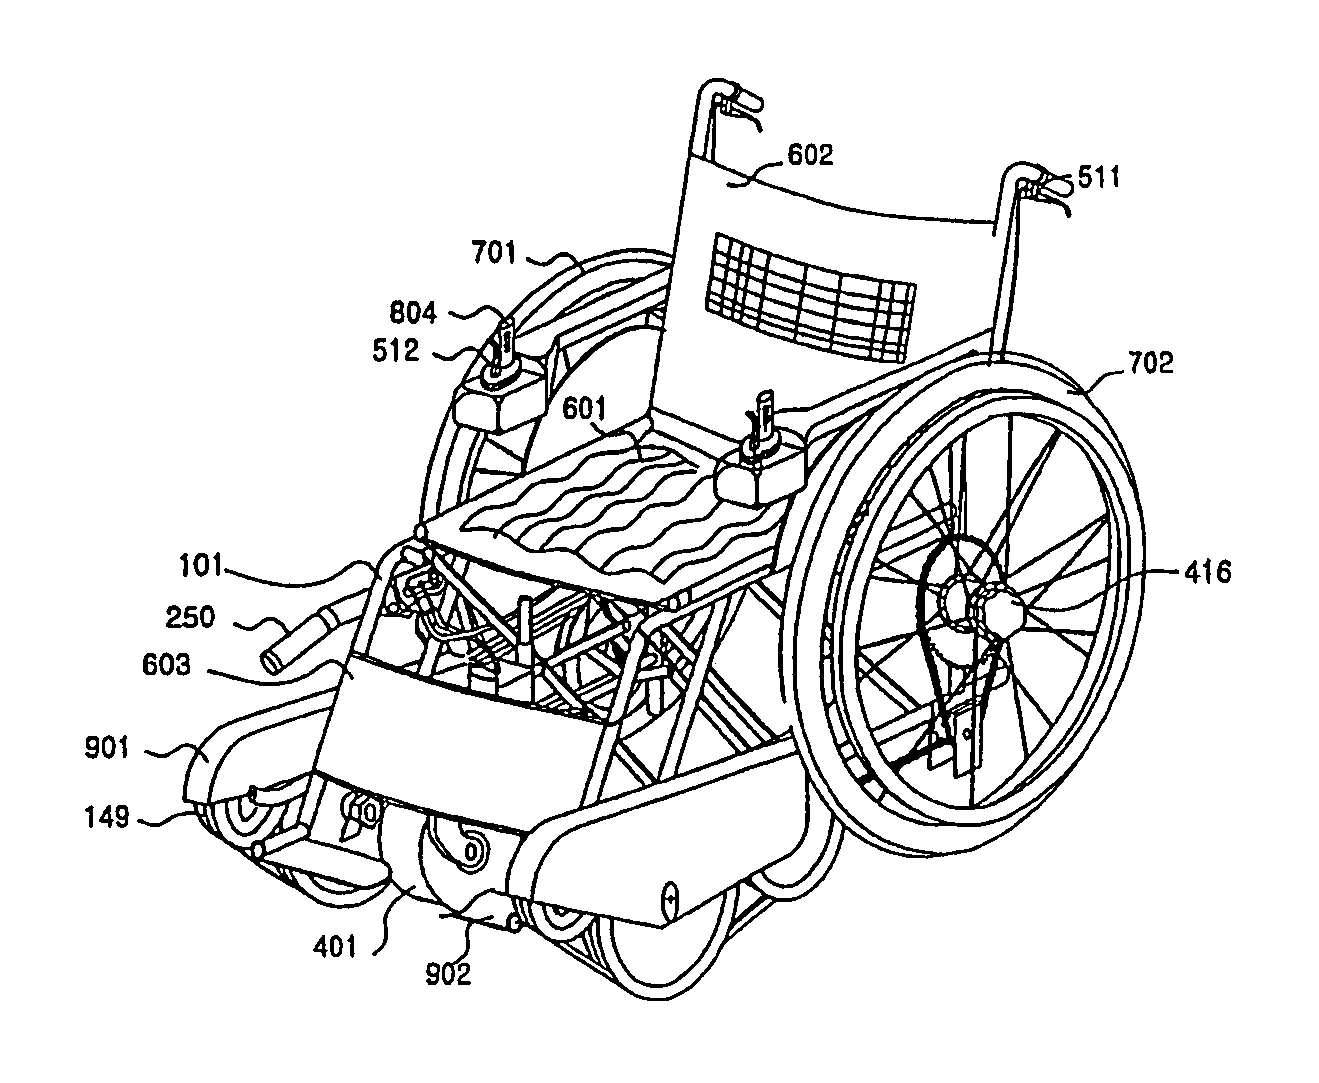 Wheelchair with forced driven front caterpillar wheels